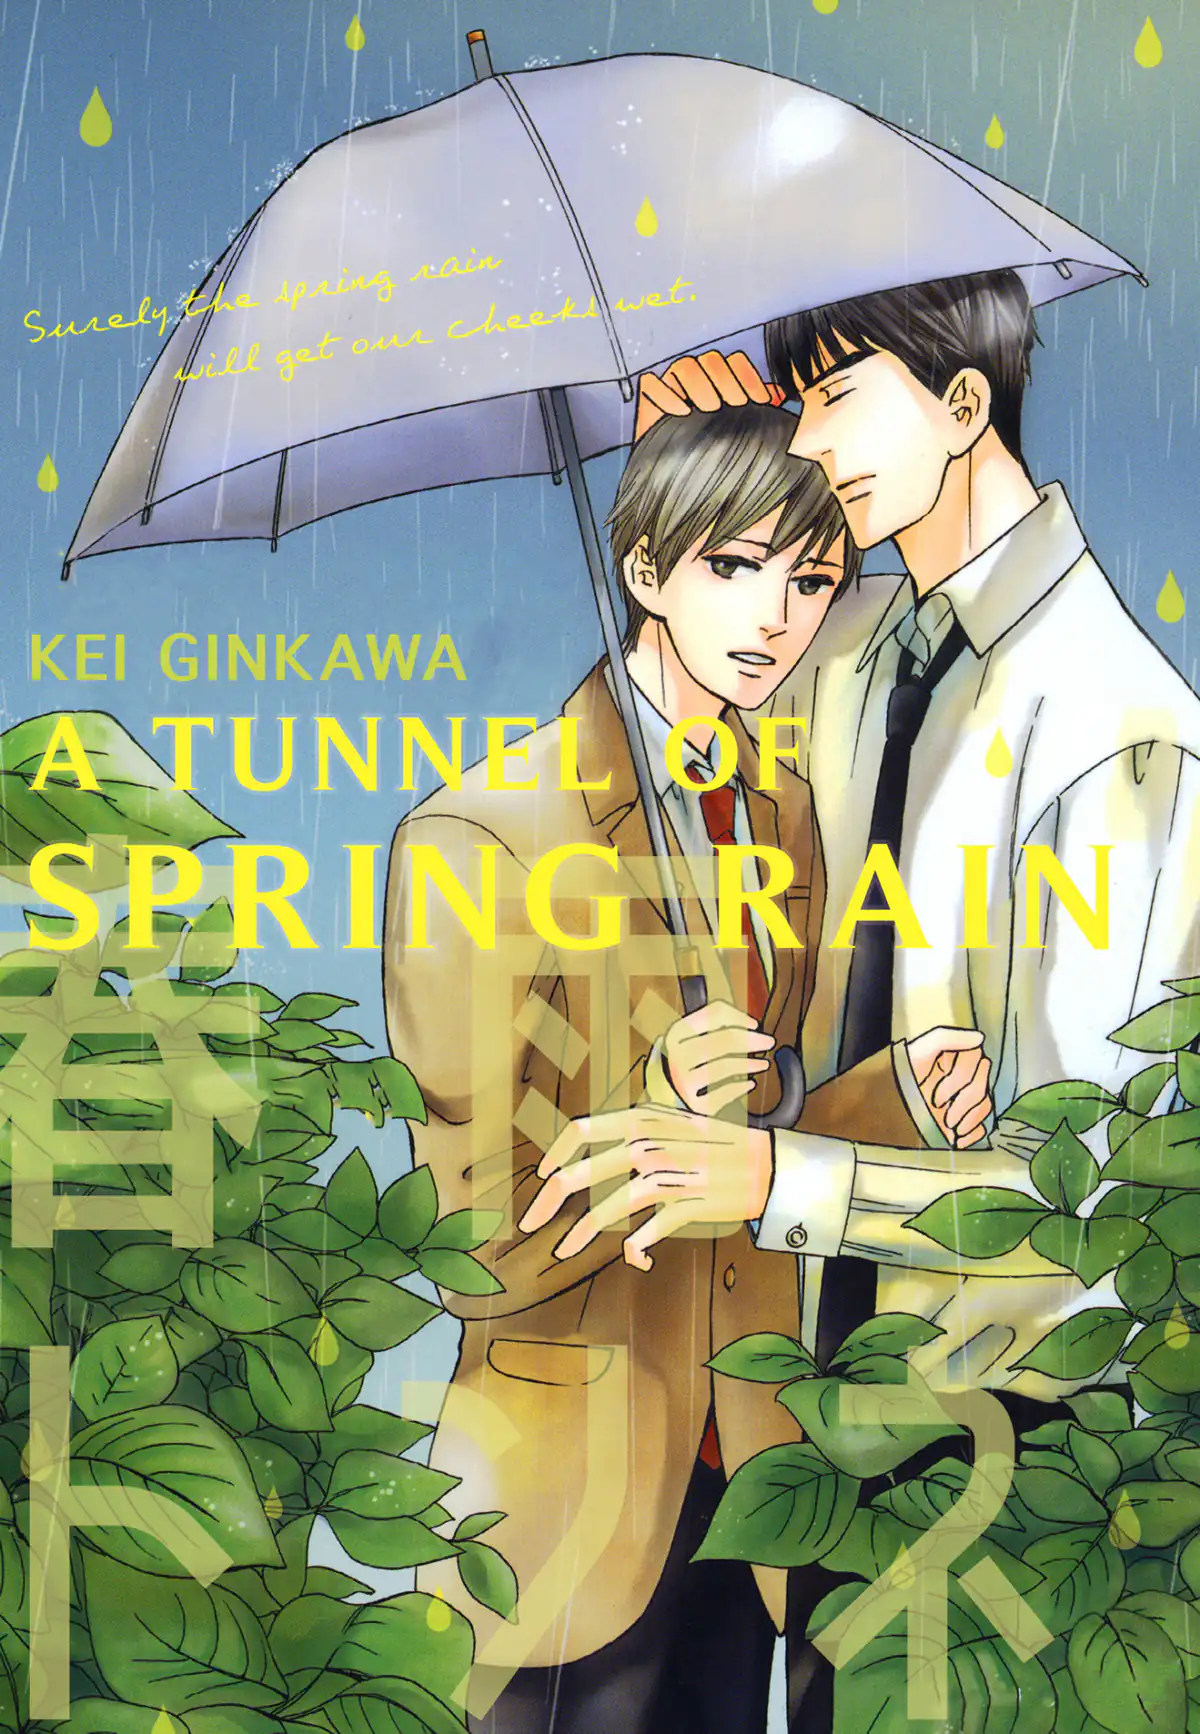 4 Manga That Will Remind You of Spring: A Tunnel of Spring Rain